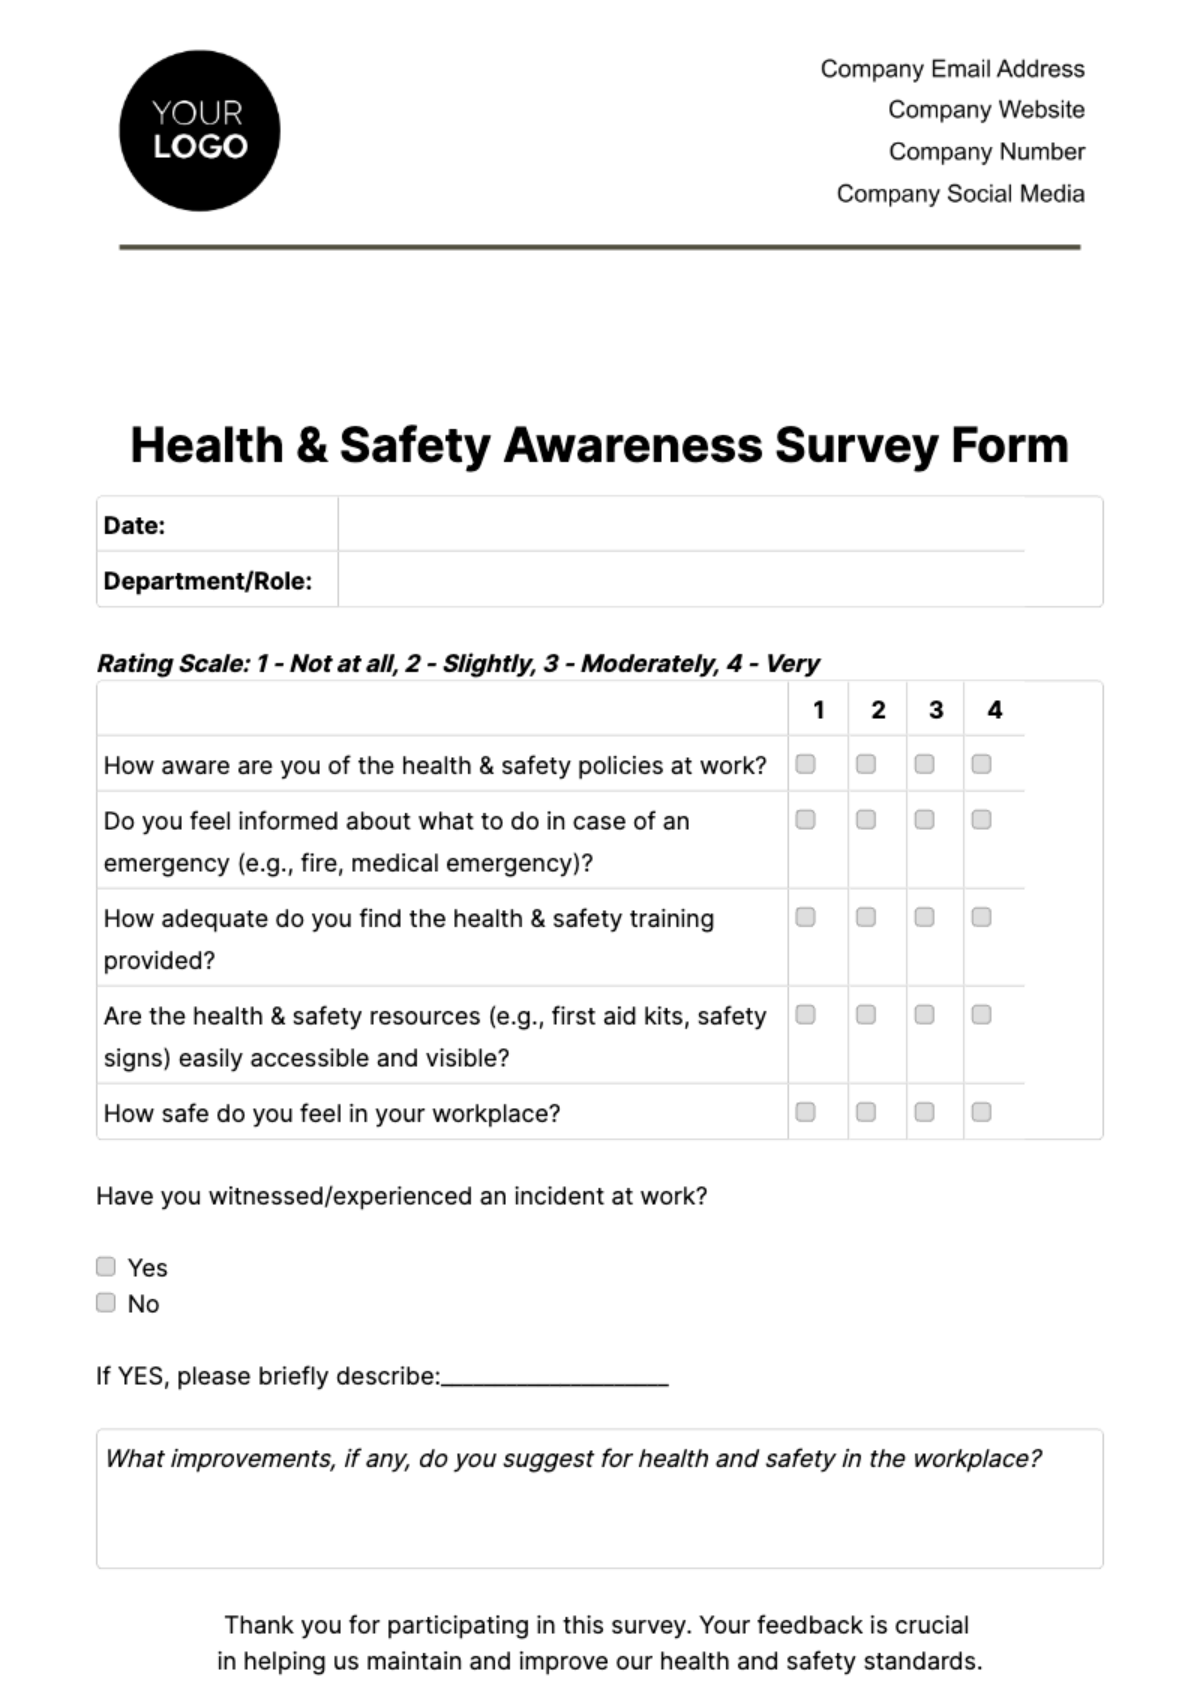 Health & Safety Awareness Survey Form Template